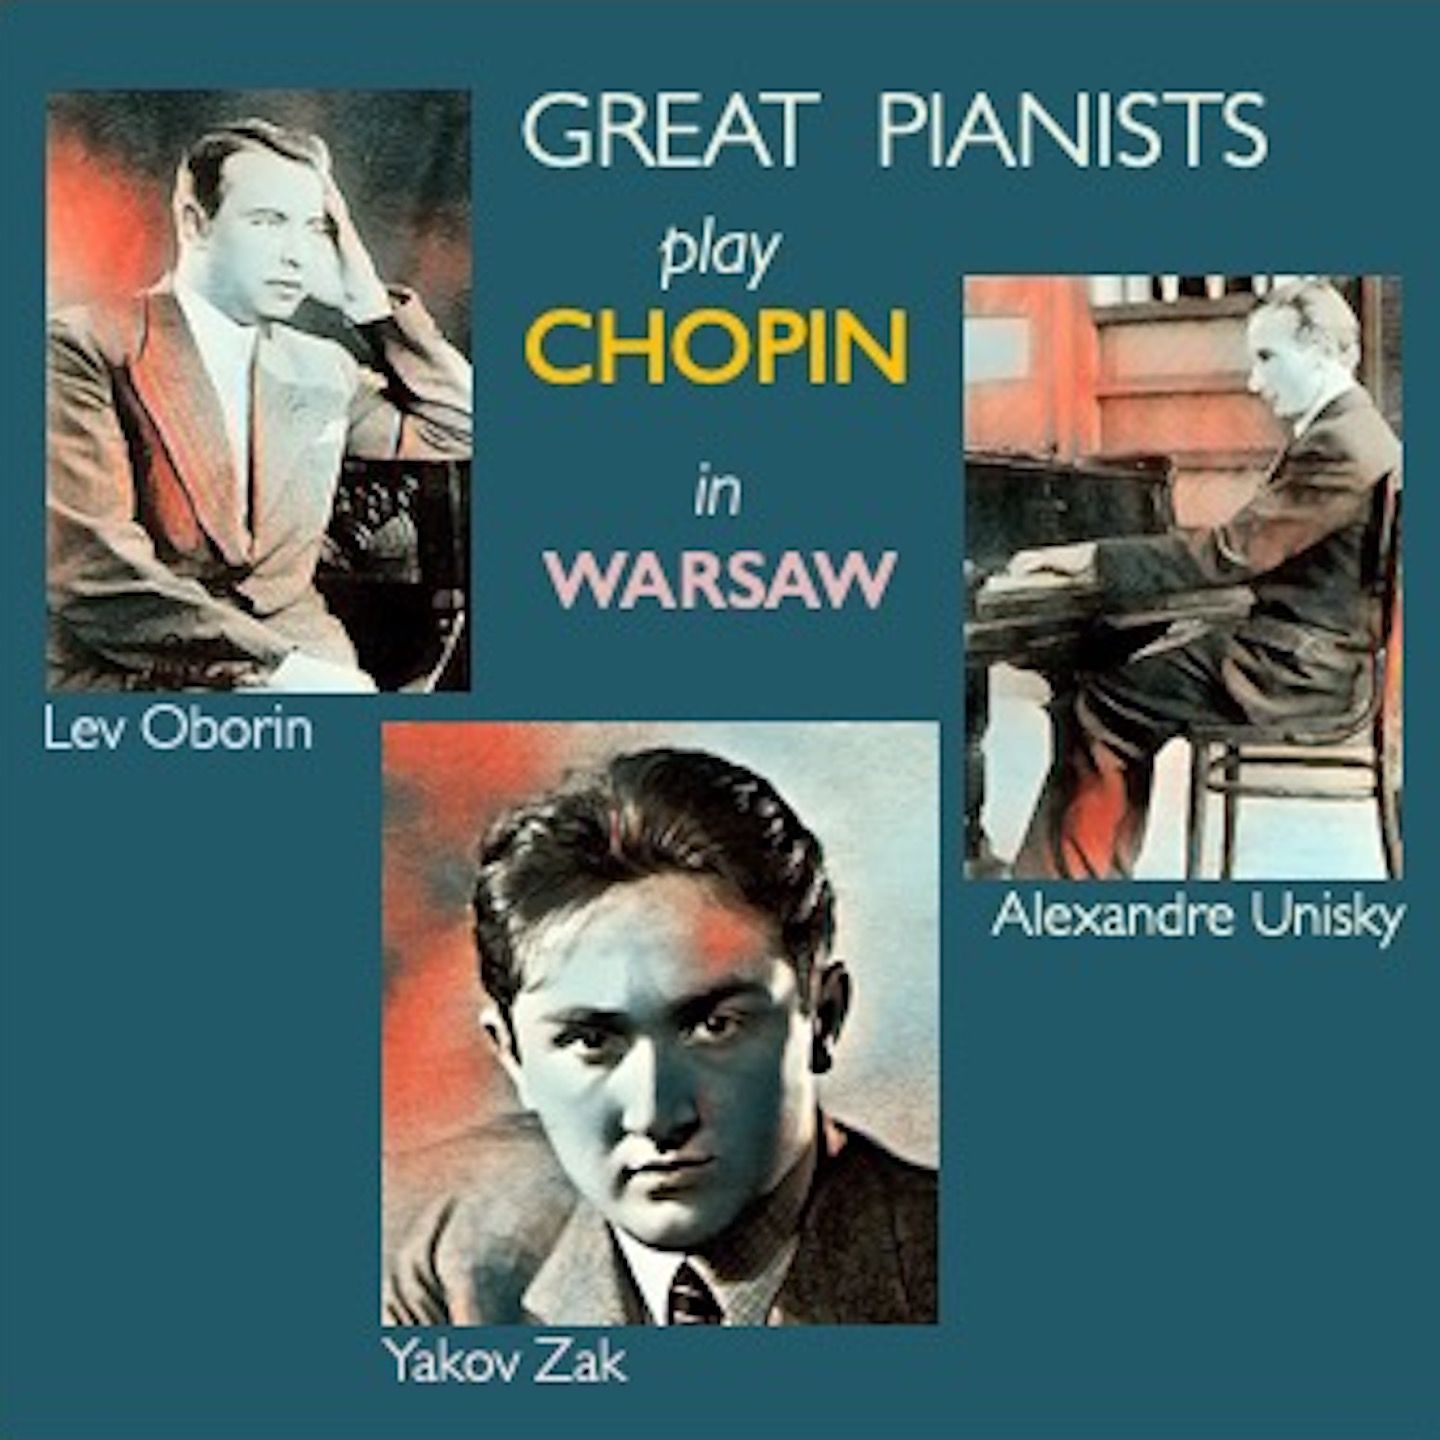 Great-pianist-play-chopin-in-warsaw-vol01